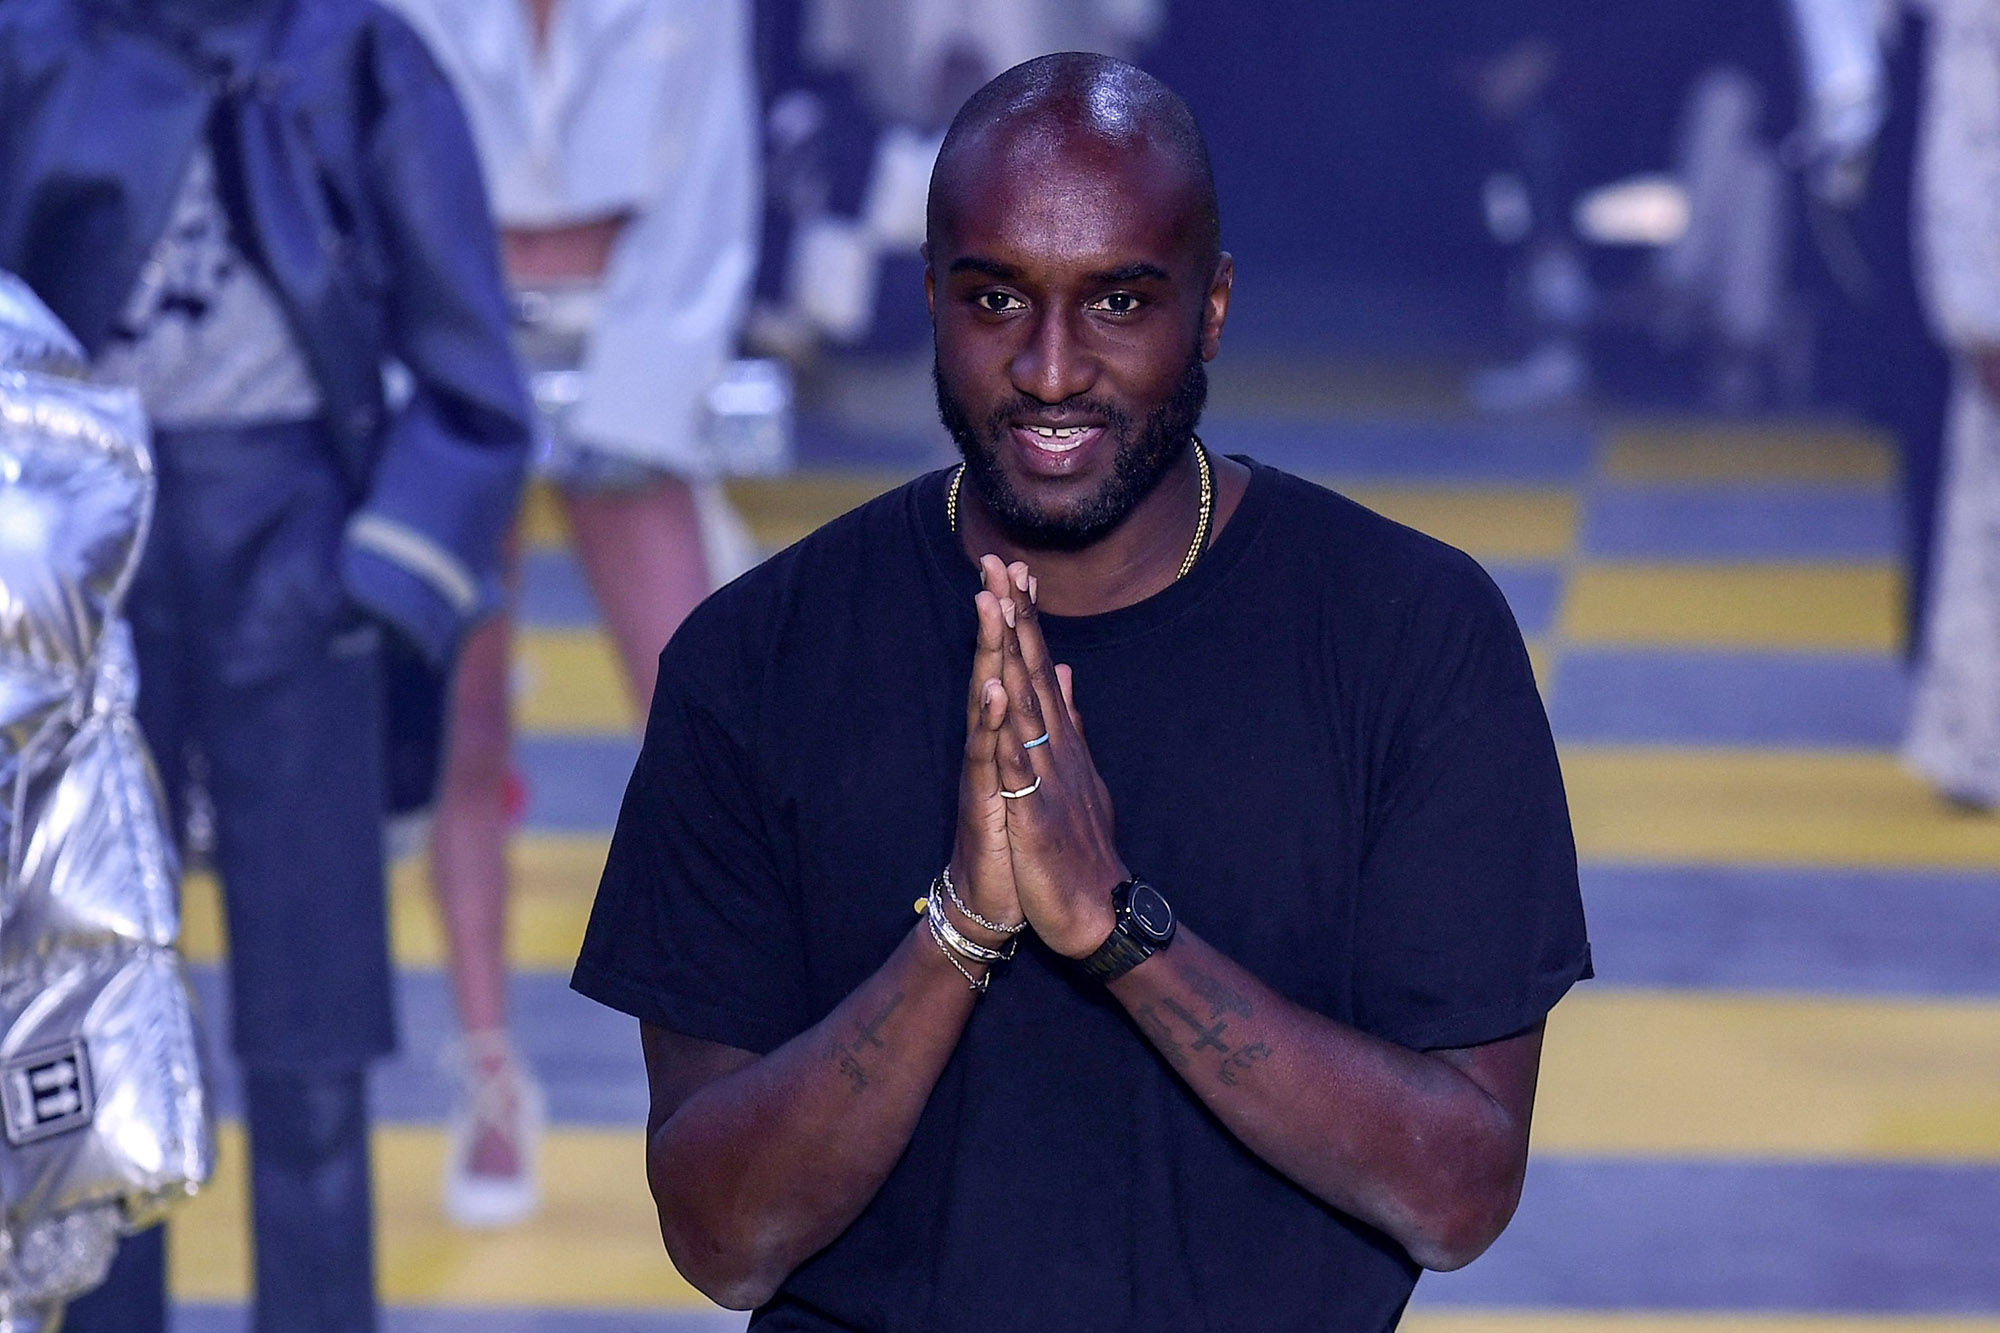 THE MEMOIR OF VIRGIL ABLOH: THE ENTIRE STORY OF A TALENTED AMERICAN FASHION  DESIGNER AND ARTISTIC DIRECTOR